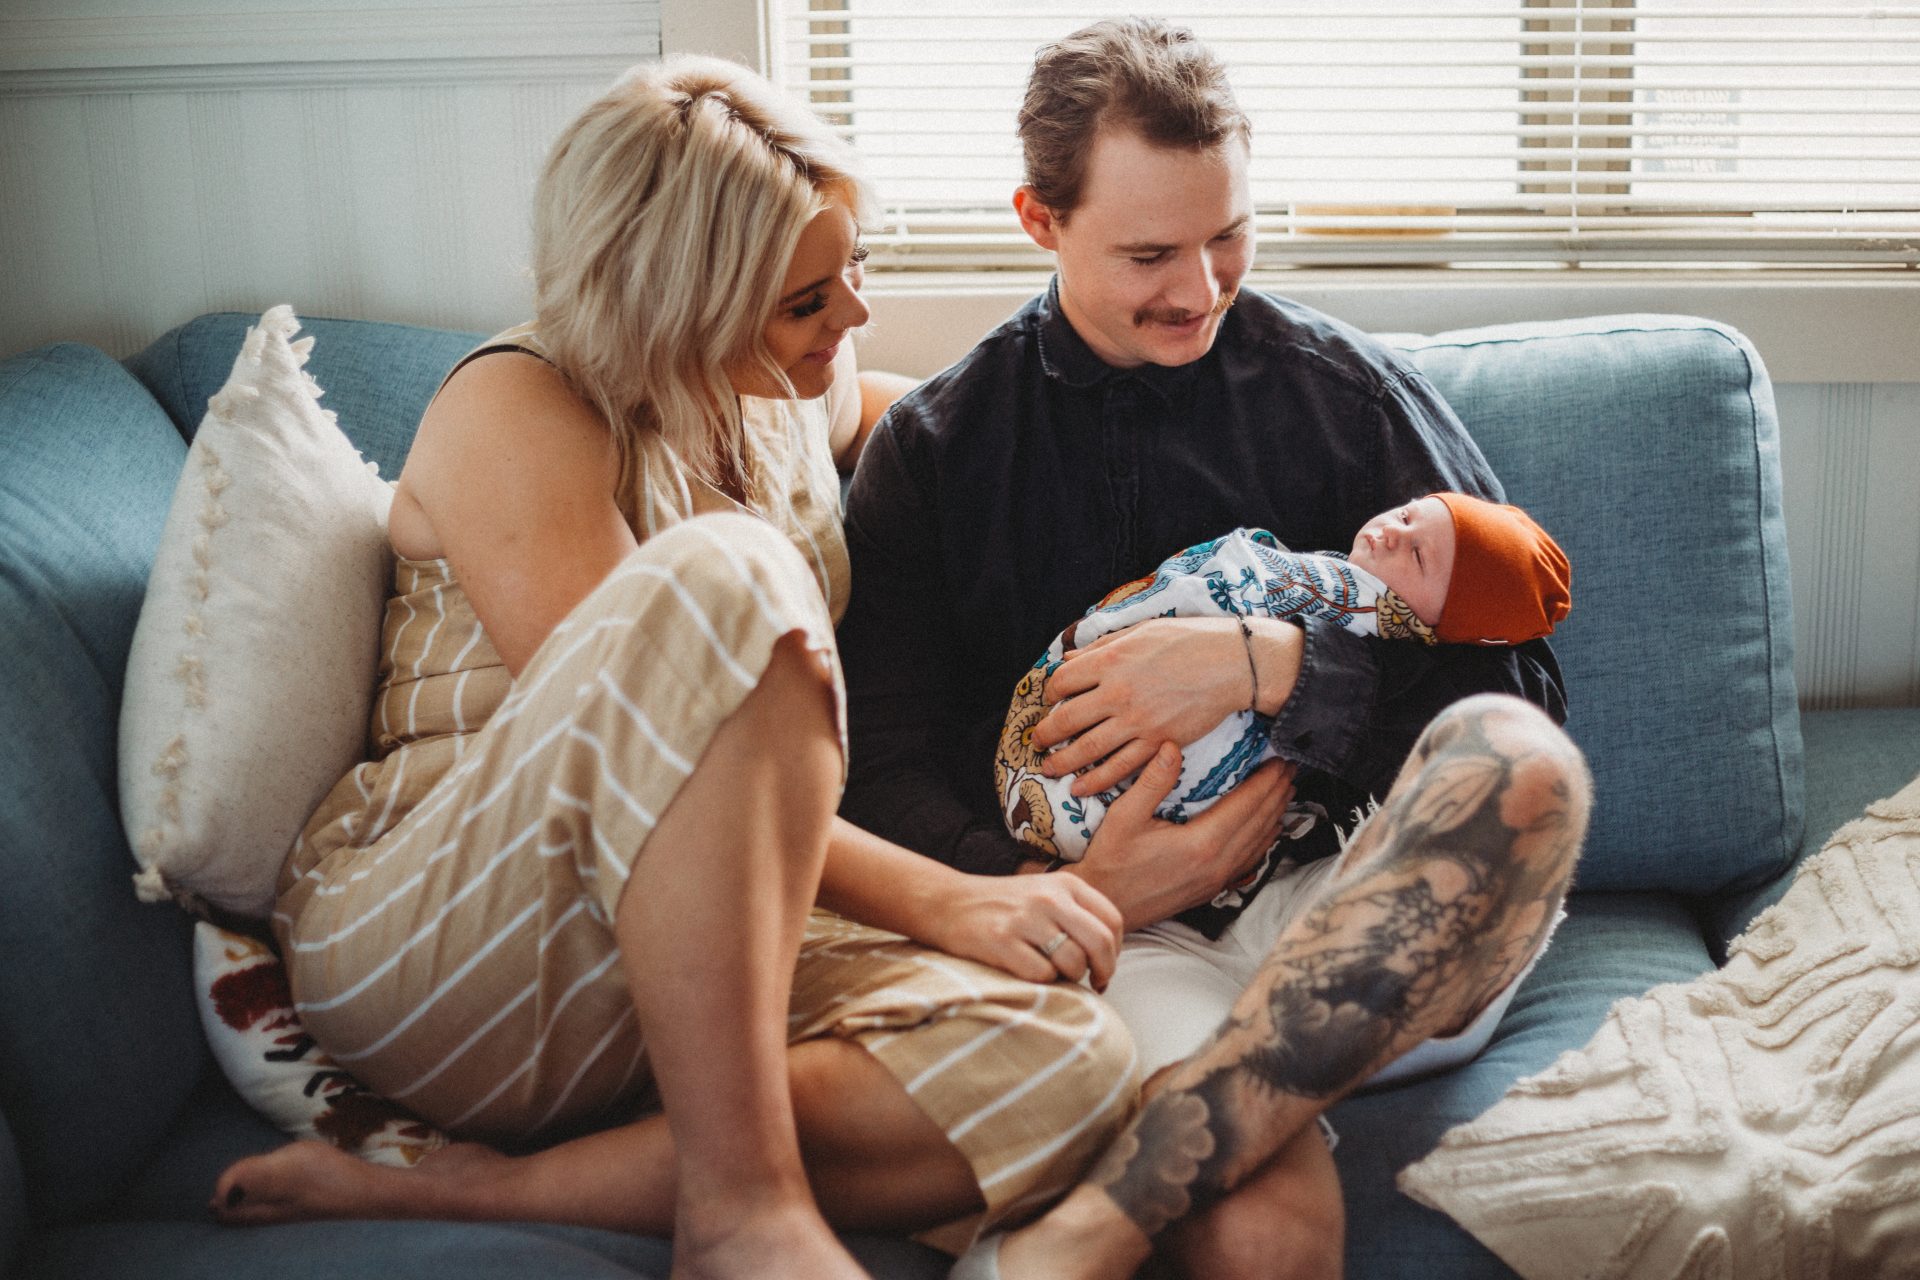 Young couple sitting casually on couch, cuddling newborn baby